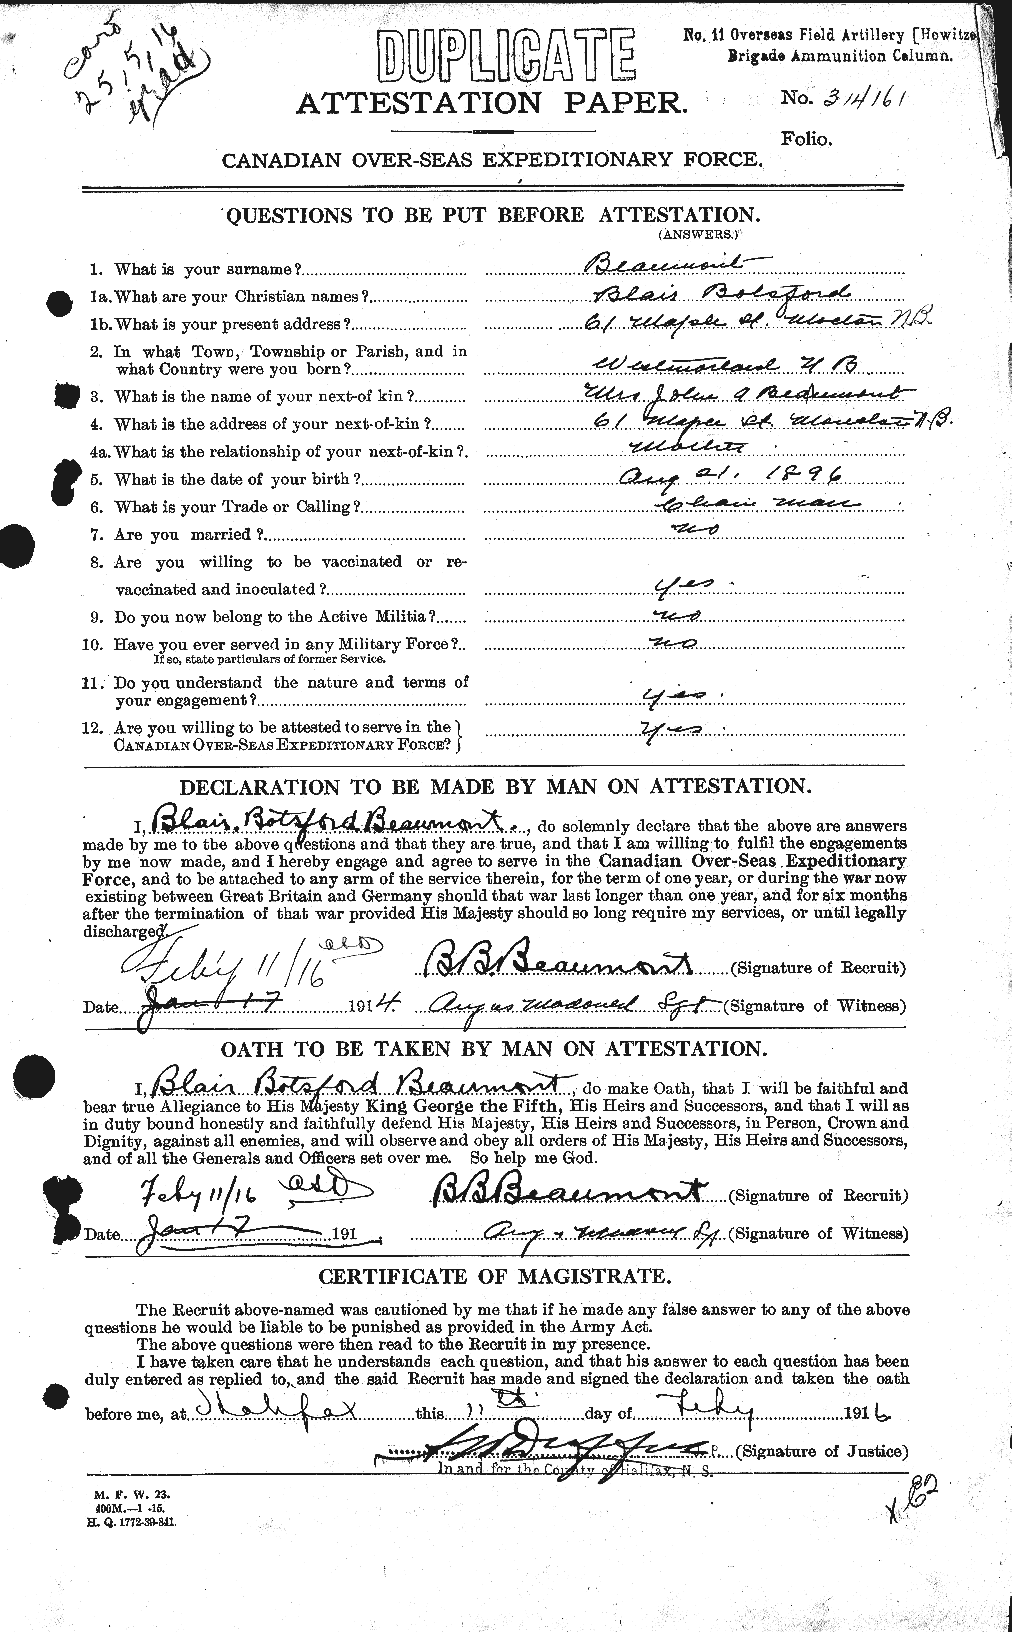 Personnel Records of the First World War - CEF 231648a